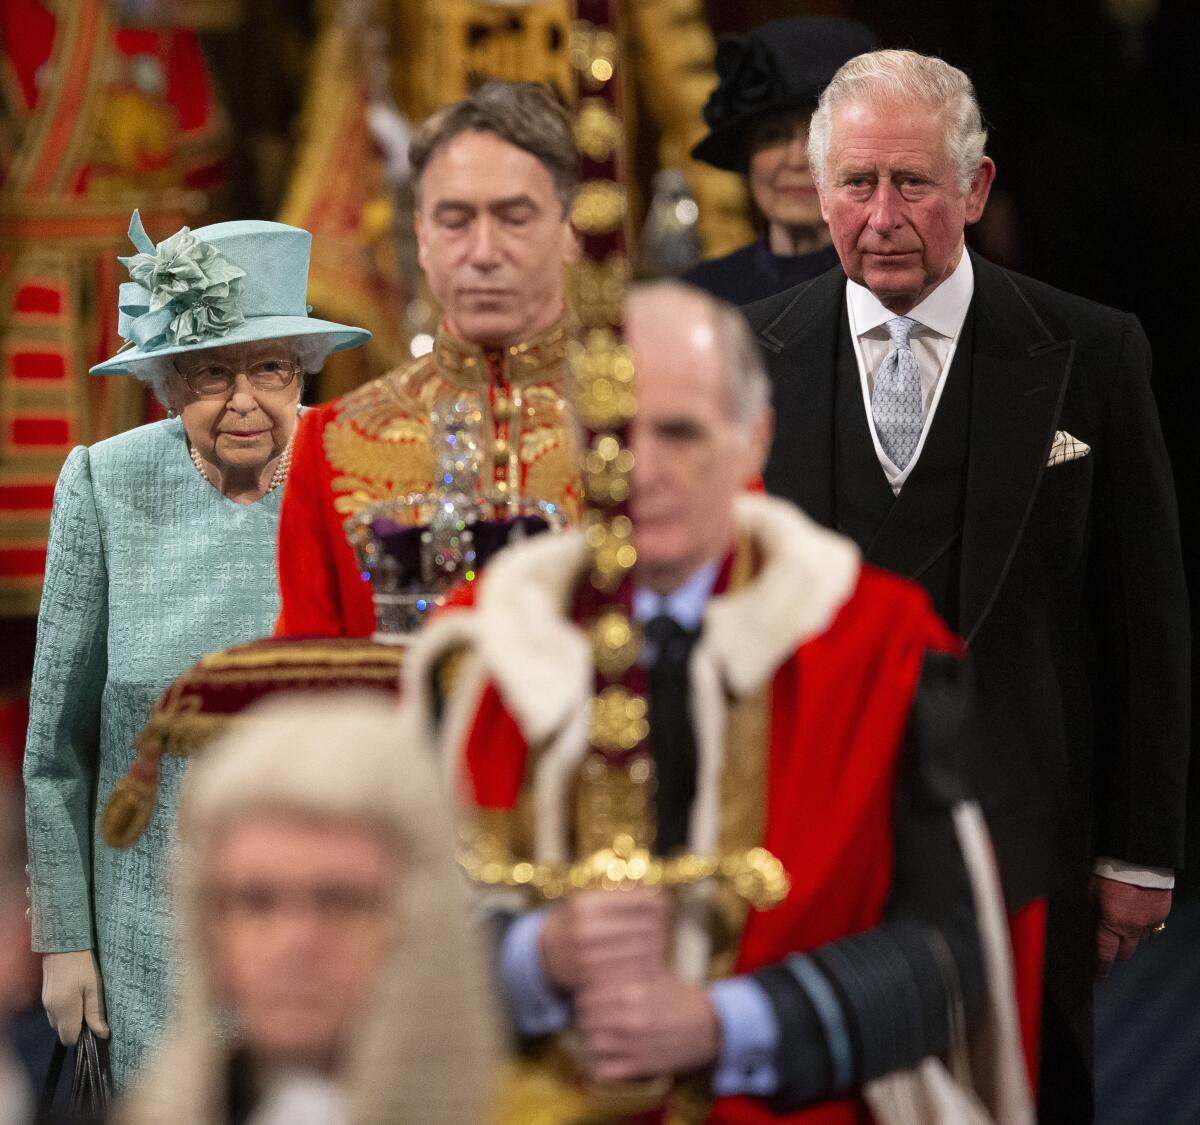 Britain's Queen Elizabeth II walks with Prince Charles through the Royal Gallery before delivering the Queen's Speech at the state opening of Parliament in London on Dec. 19, 2019.